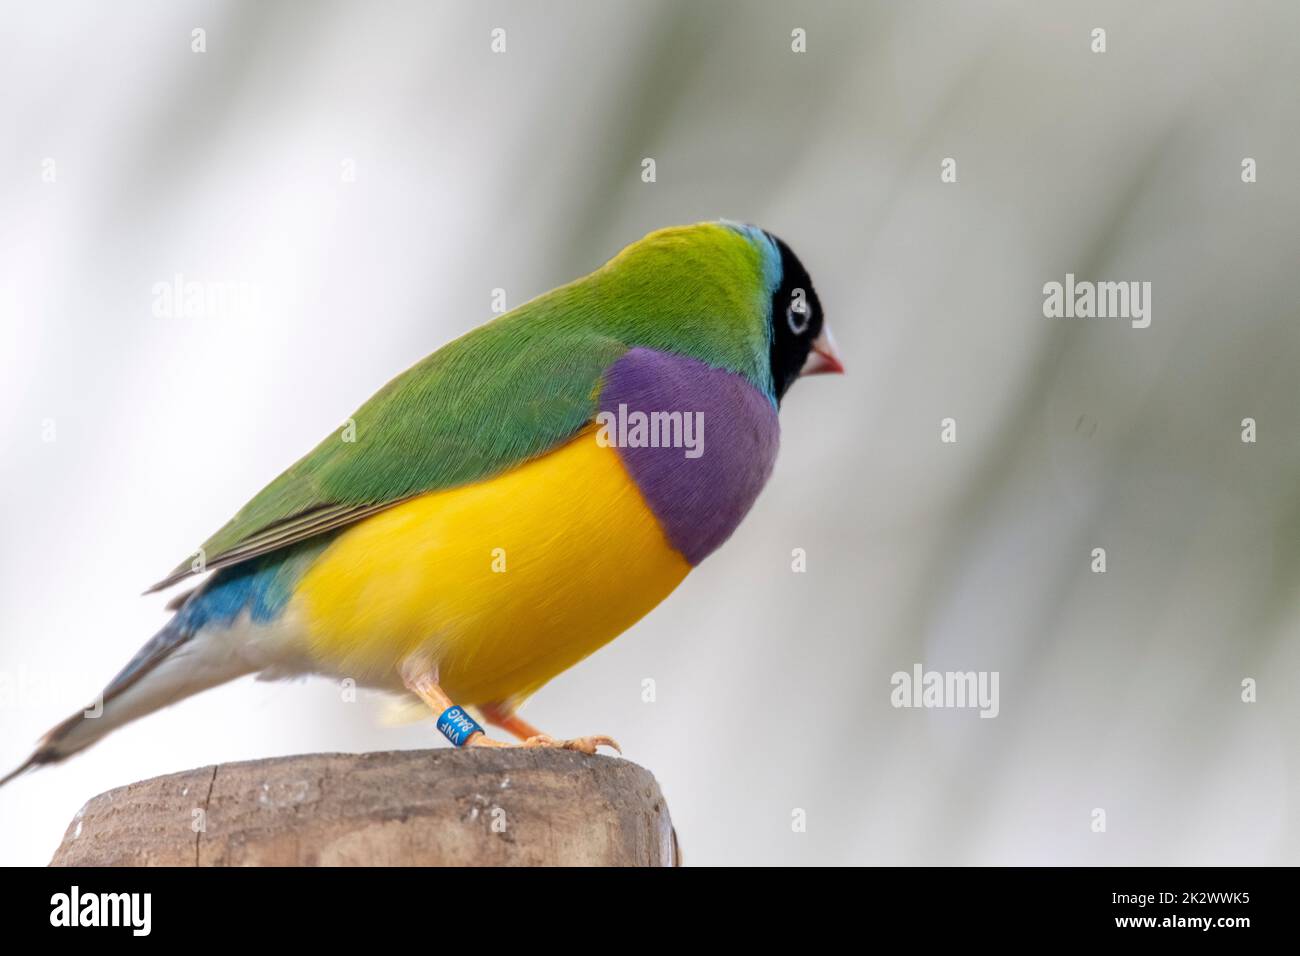 Gouldian finch - the Lady Gouldian finch, Gould's finch or the rainbow finch - colorful paradise birds Stock Photo